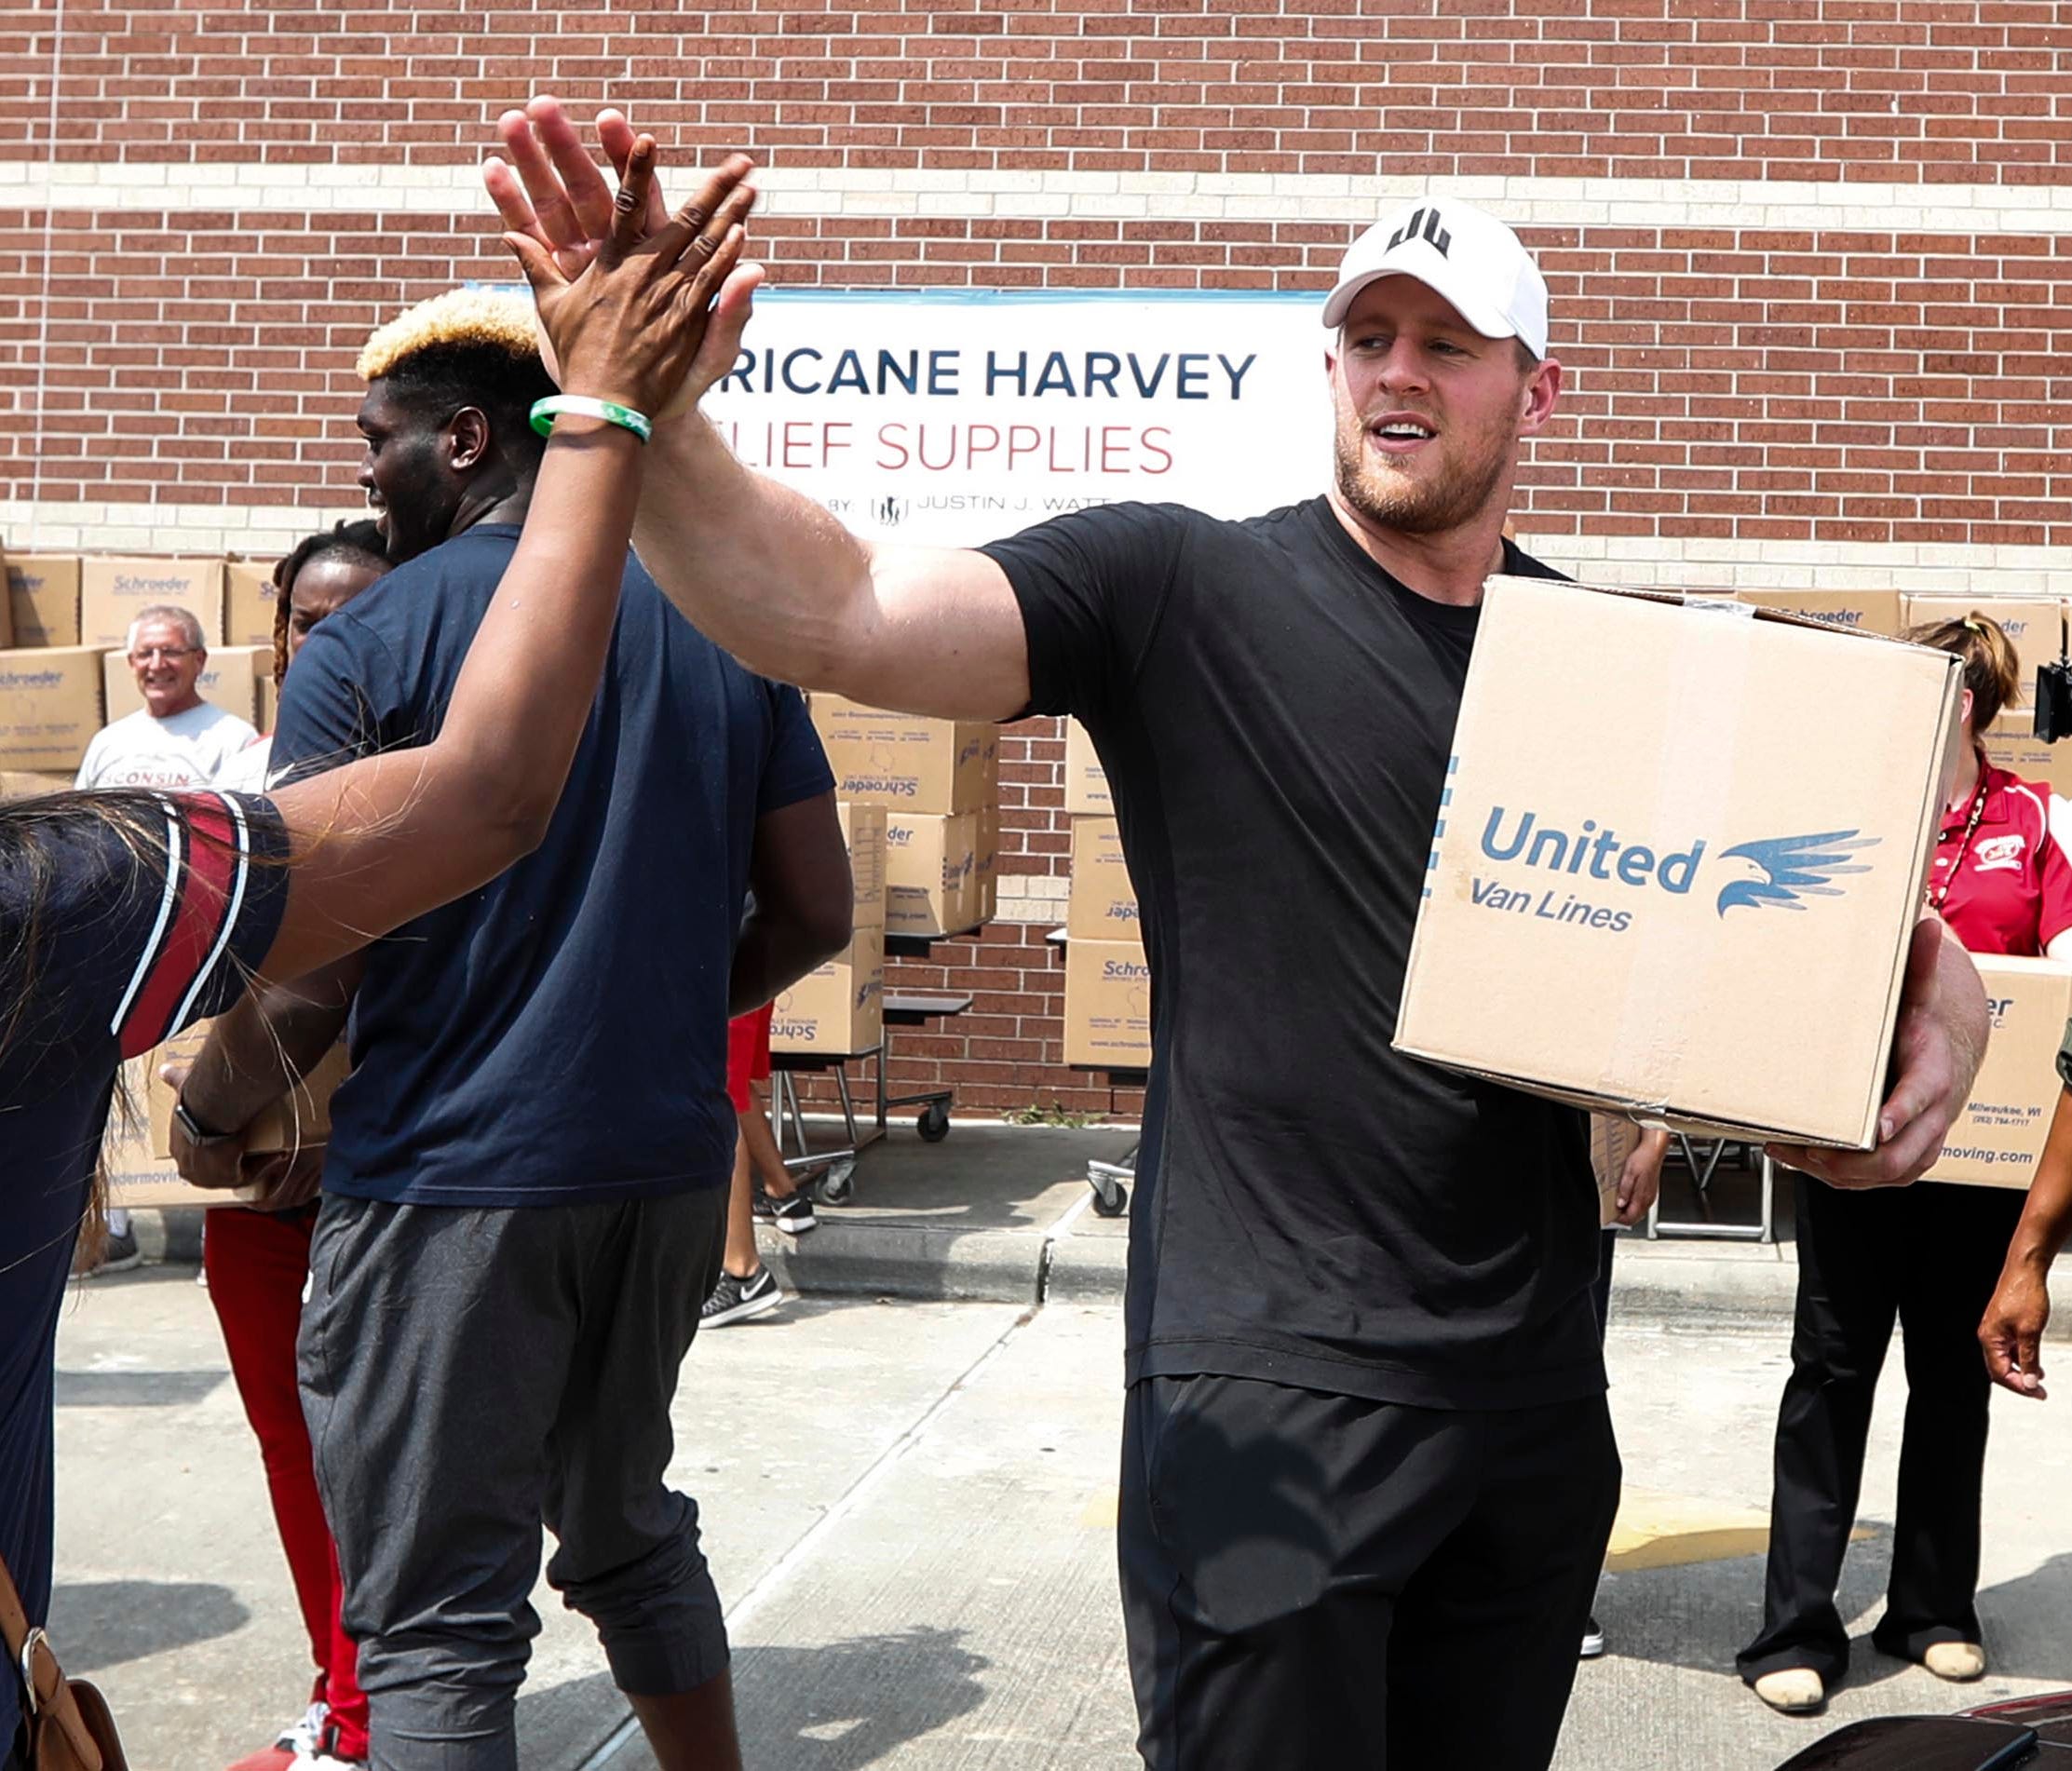 Anna Ucheomumu, left, high fives Houston Texans defensive end J.J. Watt after loading a car with relief supplies to people impacted by Hurricane Harvey on Sunday, Sept. 3, 2017, in Houston. J.J. Watt's Hurricane Harvey Relief Fund.